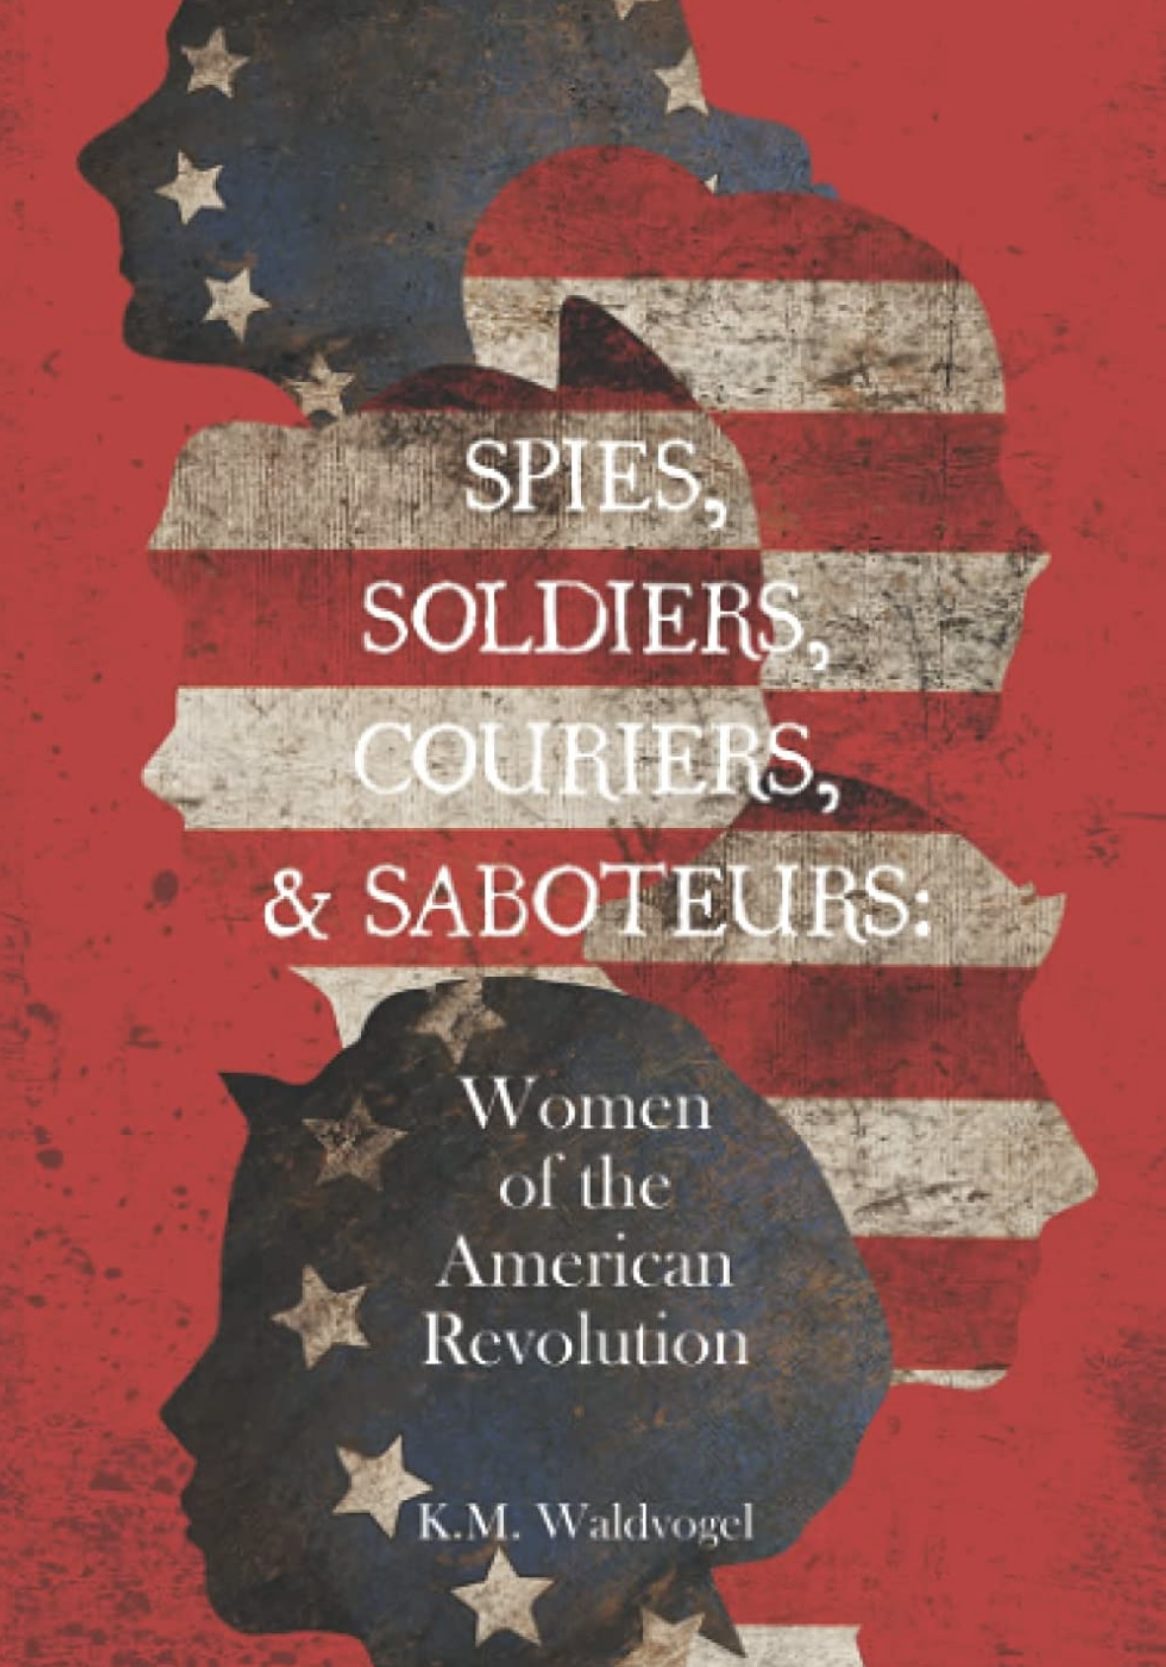 Spies, Soldiers, Couriers, & Saboteurs: Women of the american revolution by K.M. Waldvogel